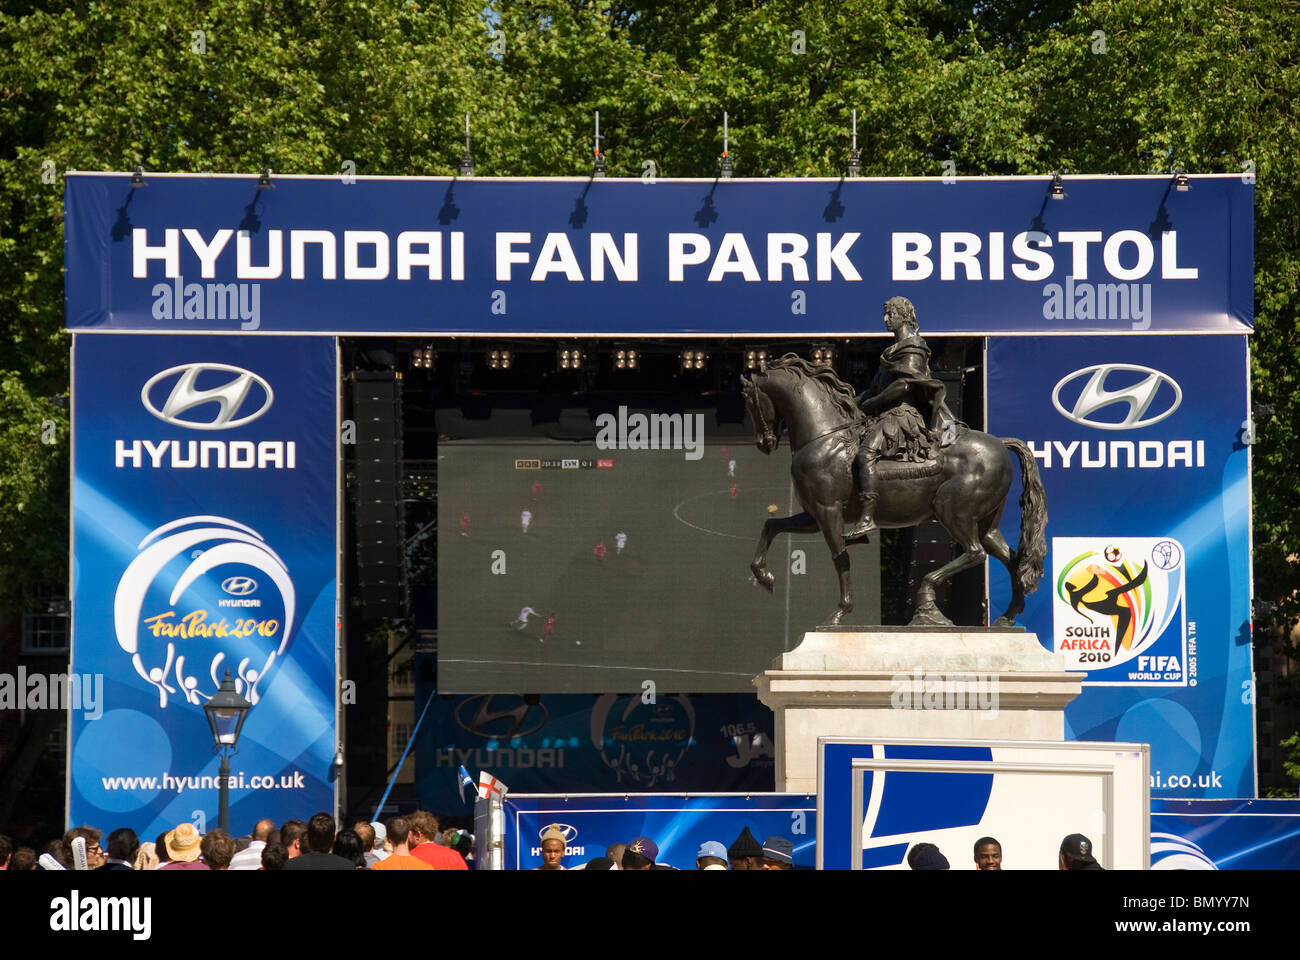 Statue of William III ion front of giant screen, World Cup, Fan Park Bristol, UK Stock Photo